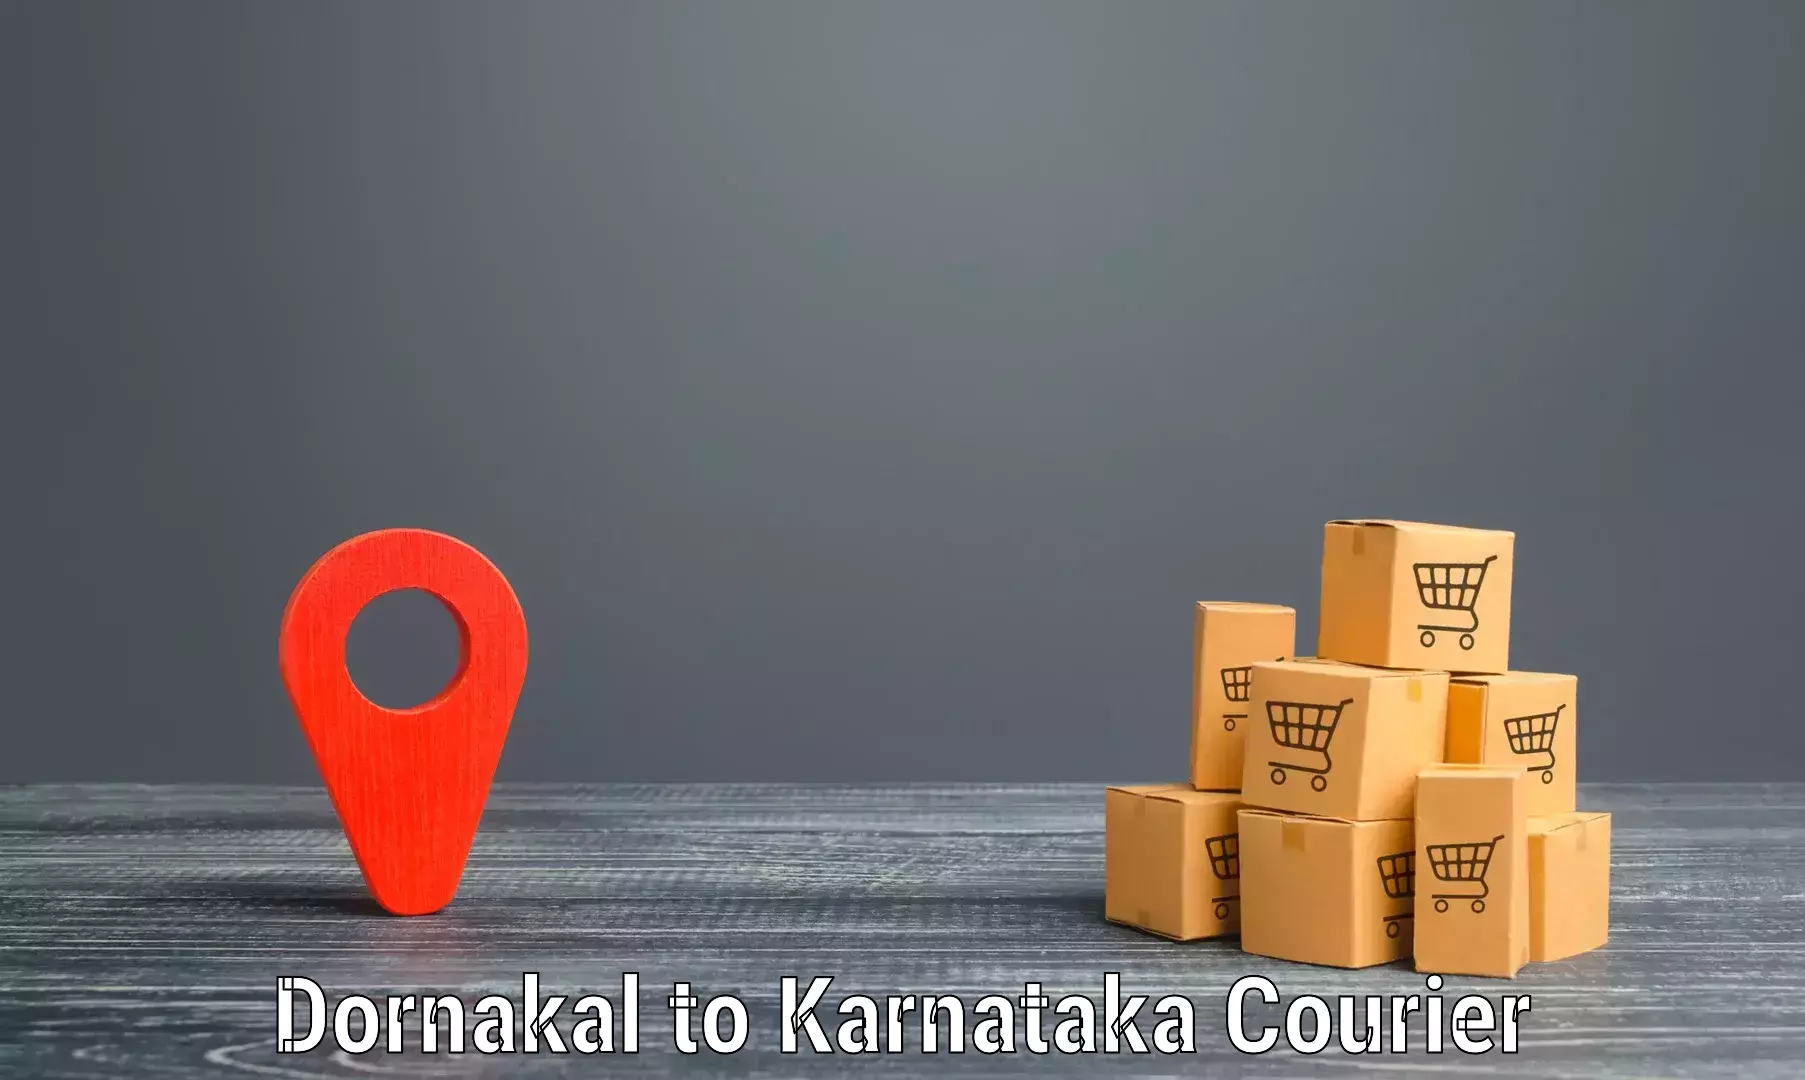 State-of-the-art courier technology Dornakal to Mudhol